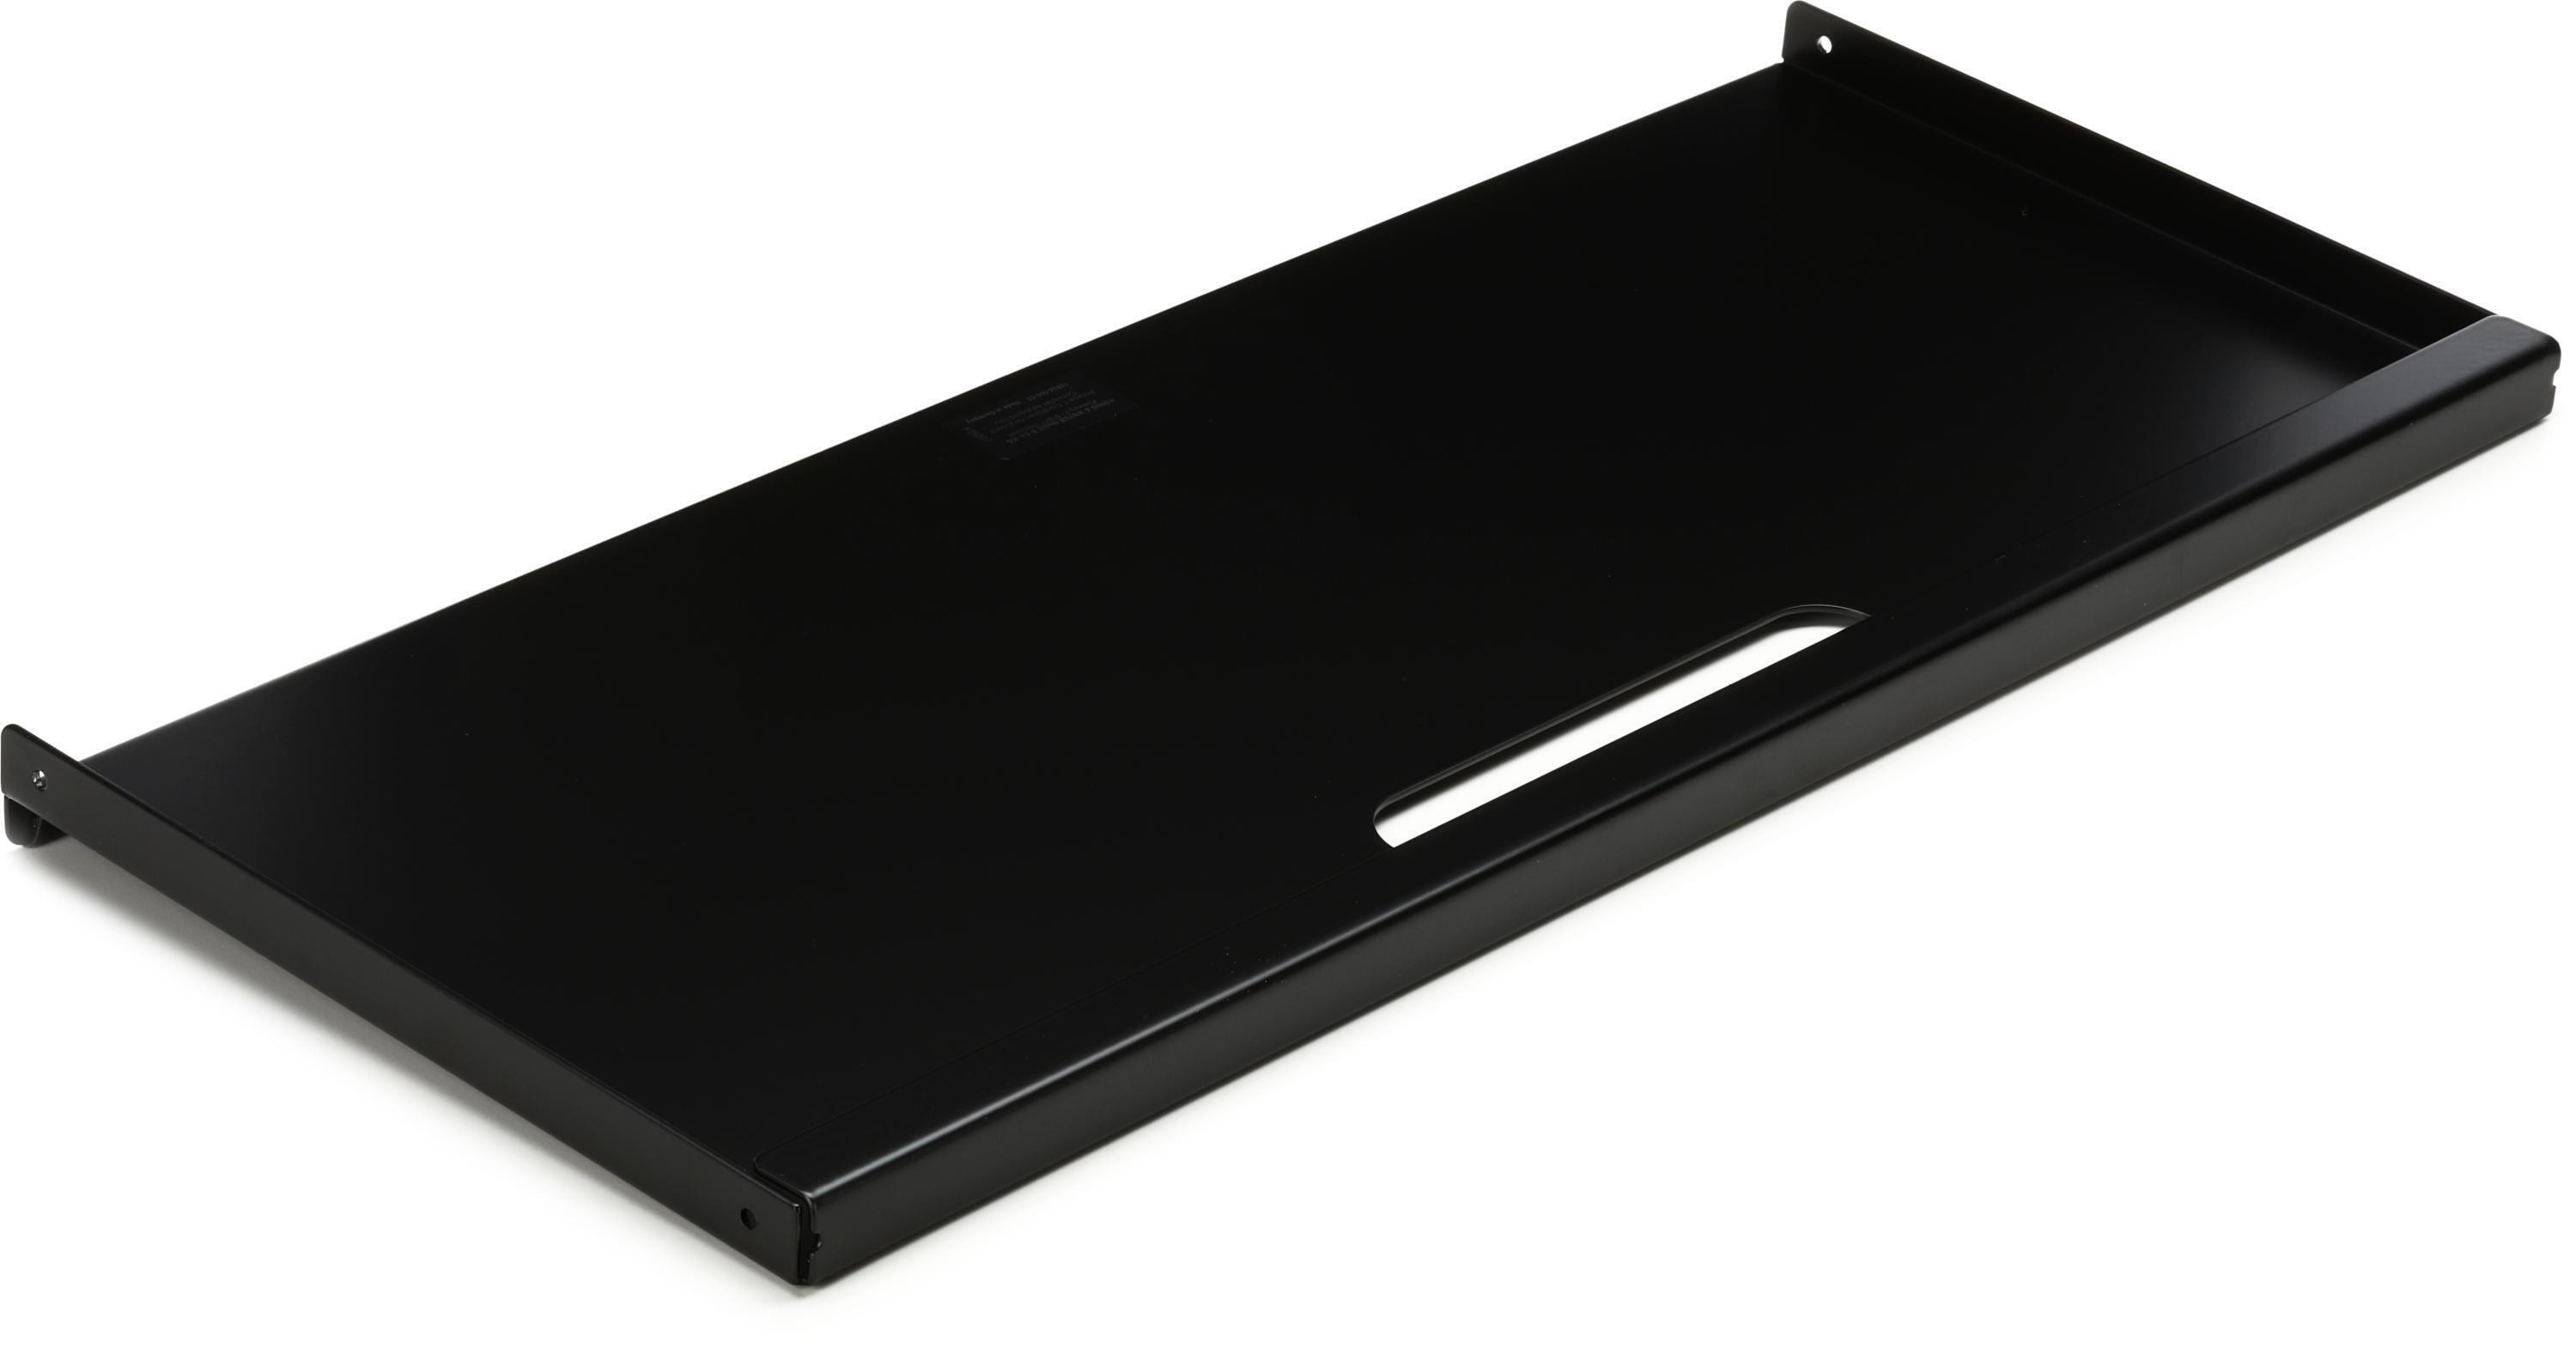 K&M 18824 Controller Keyboard Tray for Omega Stand 18810 | Sweetwater